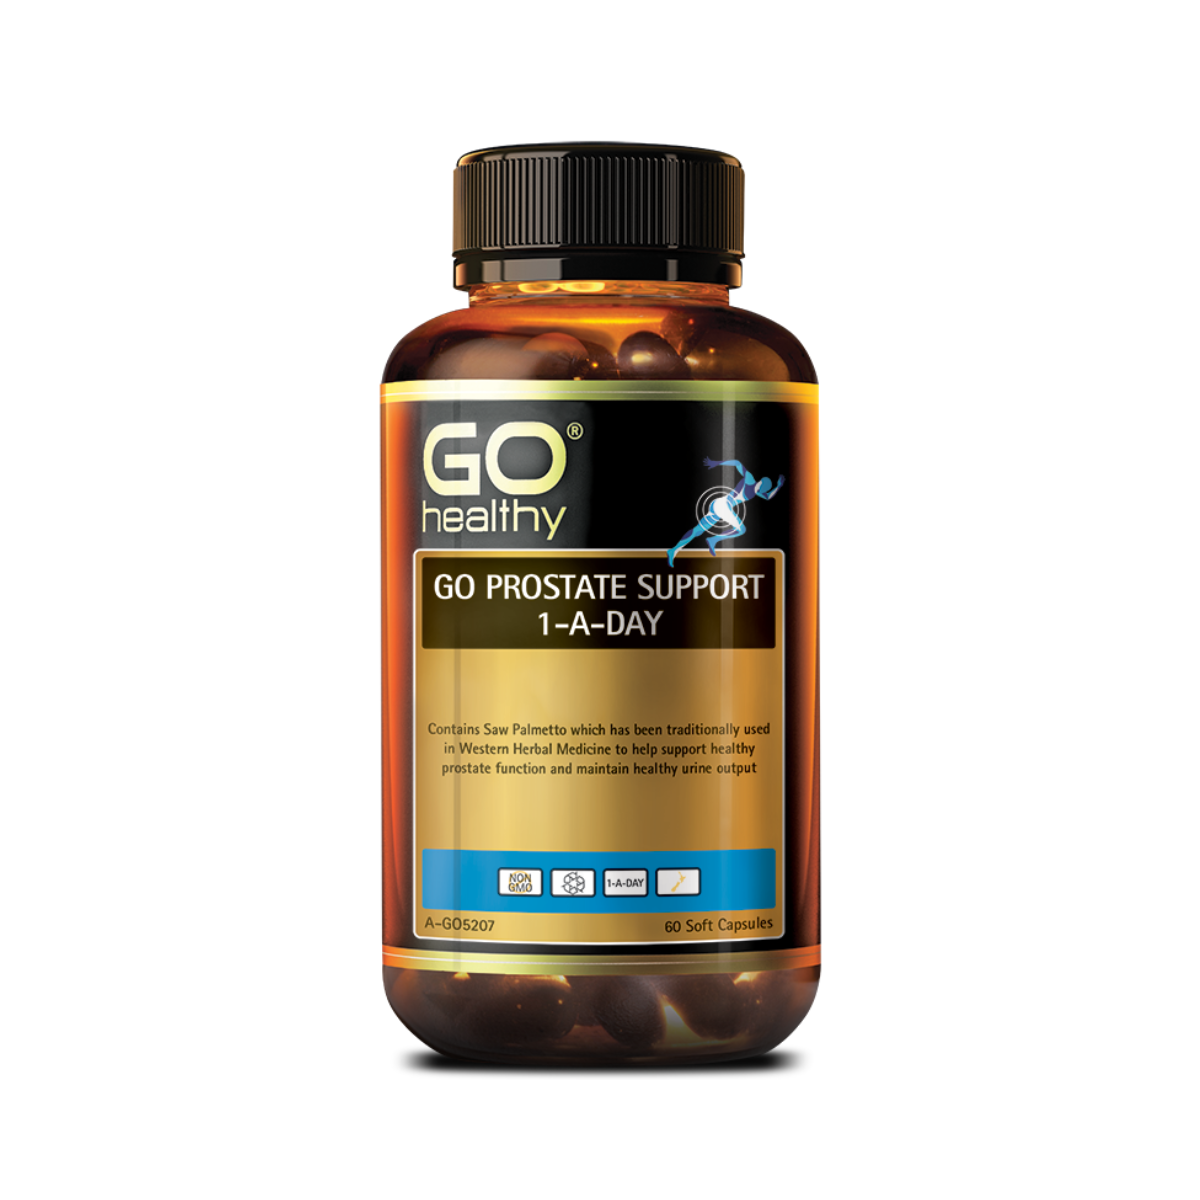 Go Healthy Prostate Support 1-A-DAY 60 Capsules